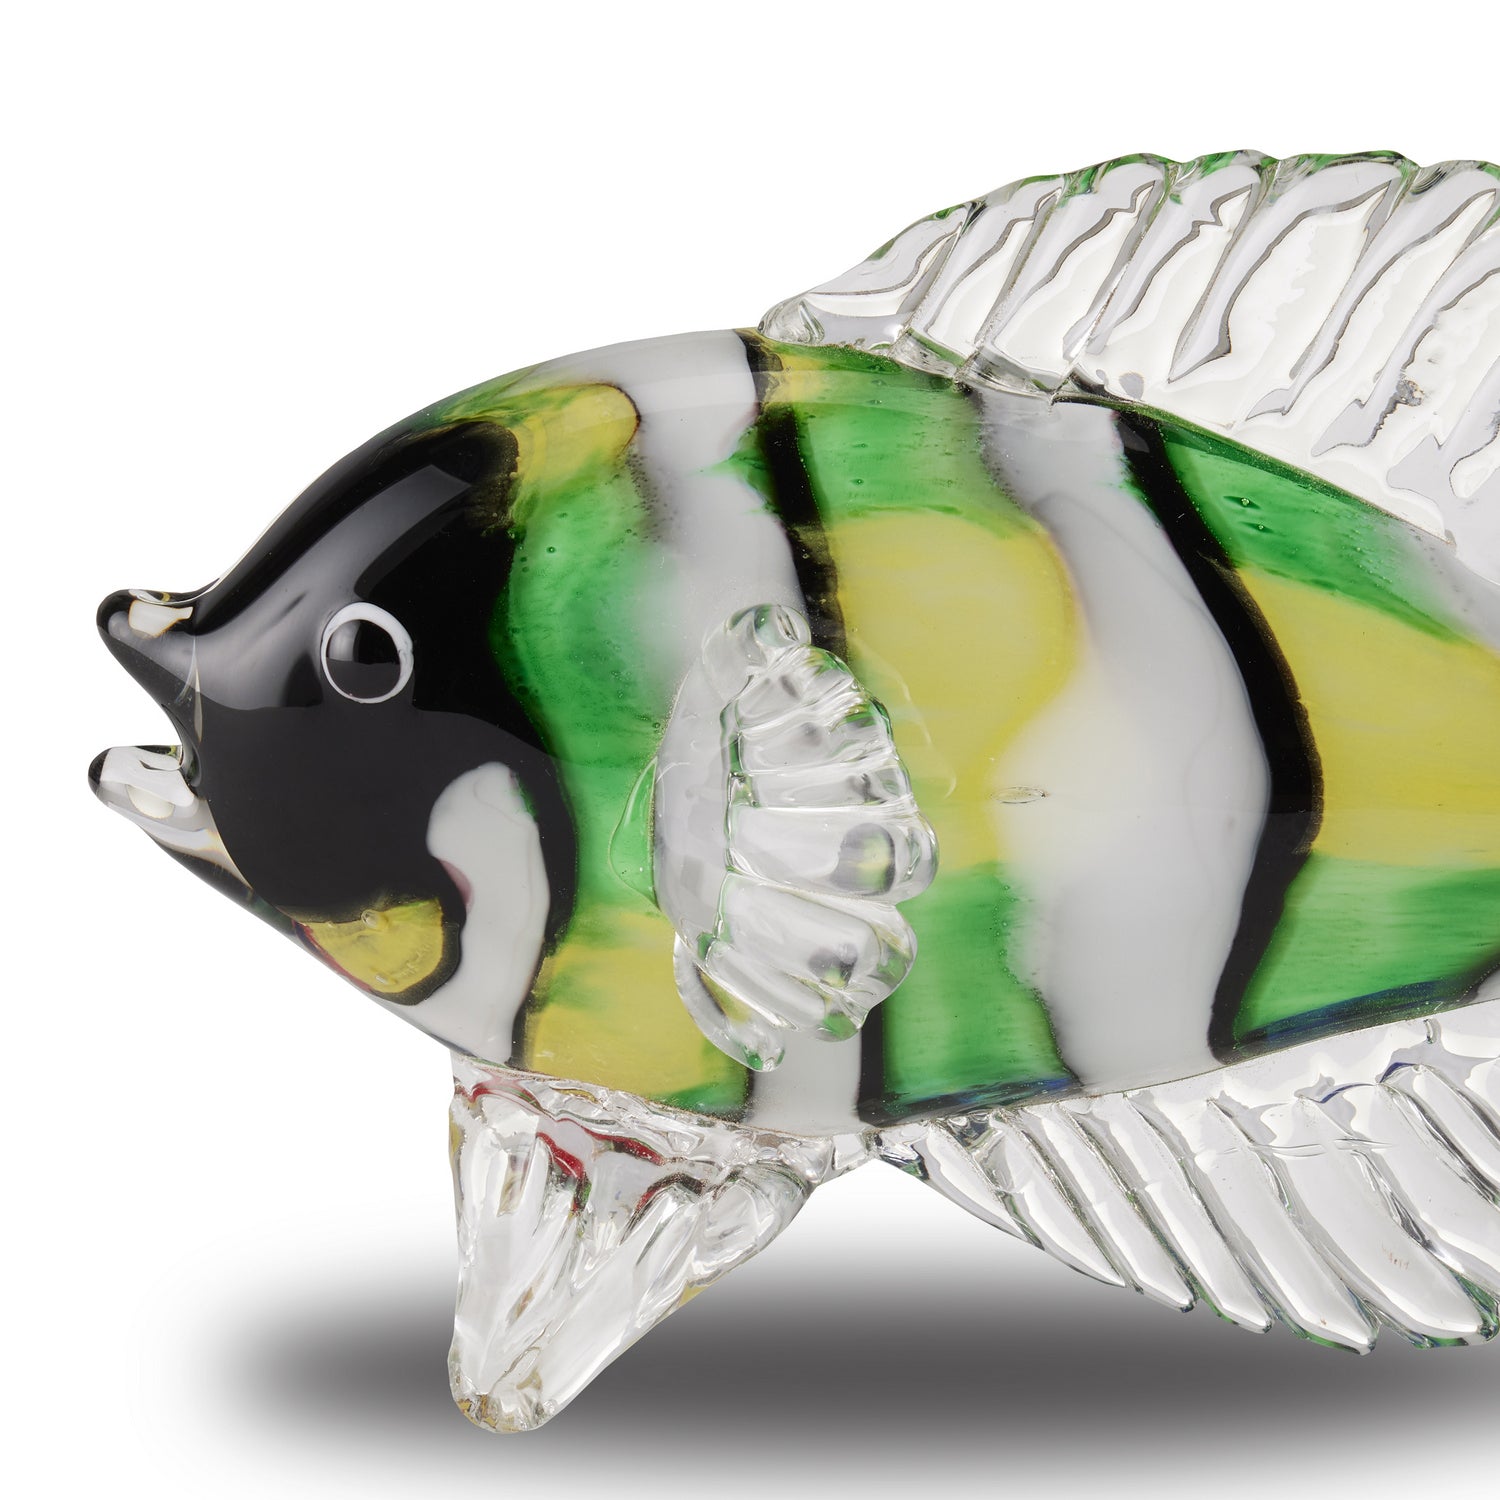 Fish Set of 2 from the Rialto collection in Green/Black/White/Multicolor finish